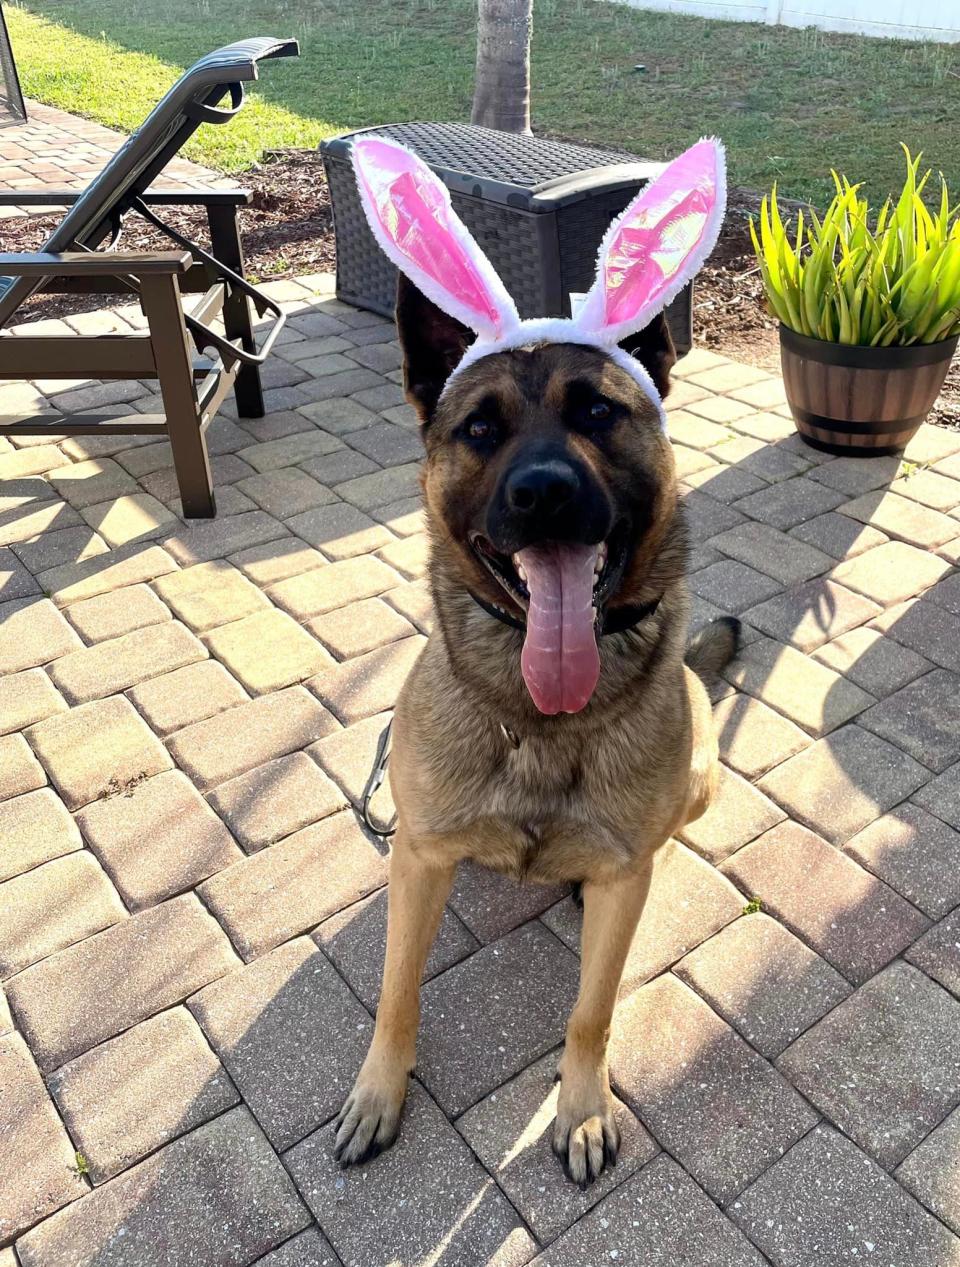 The Ocoee Police Department celebrated Easter with an egg hunt and a K9.